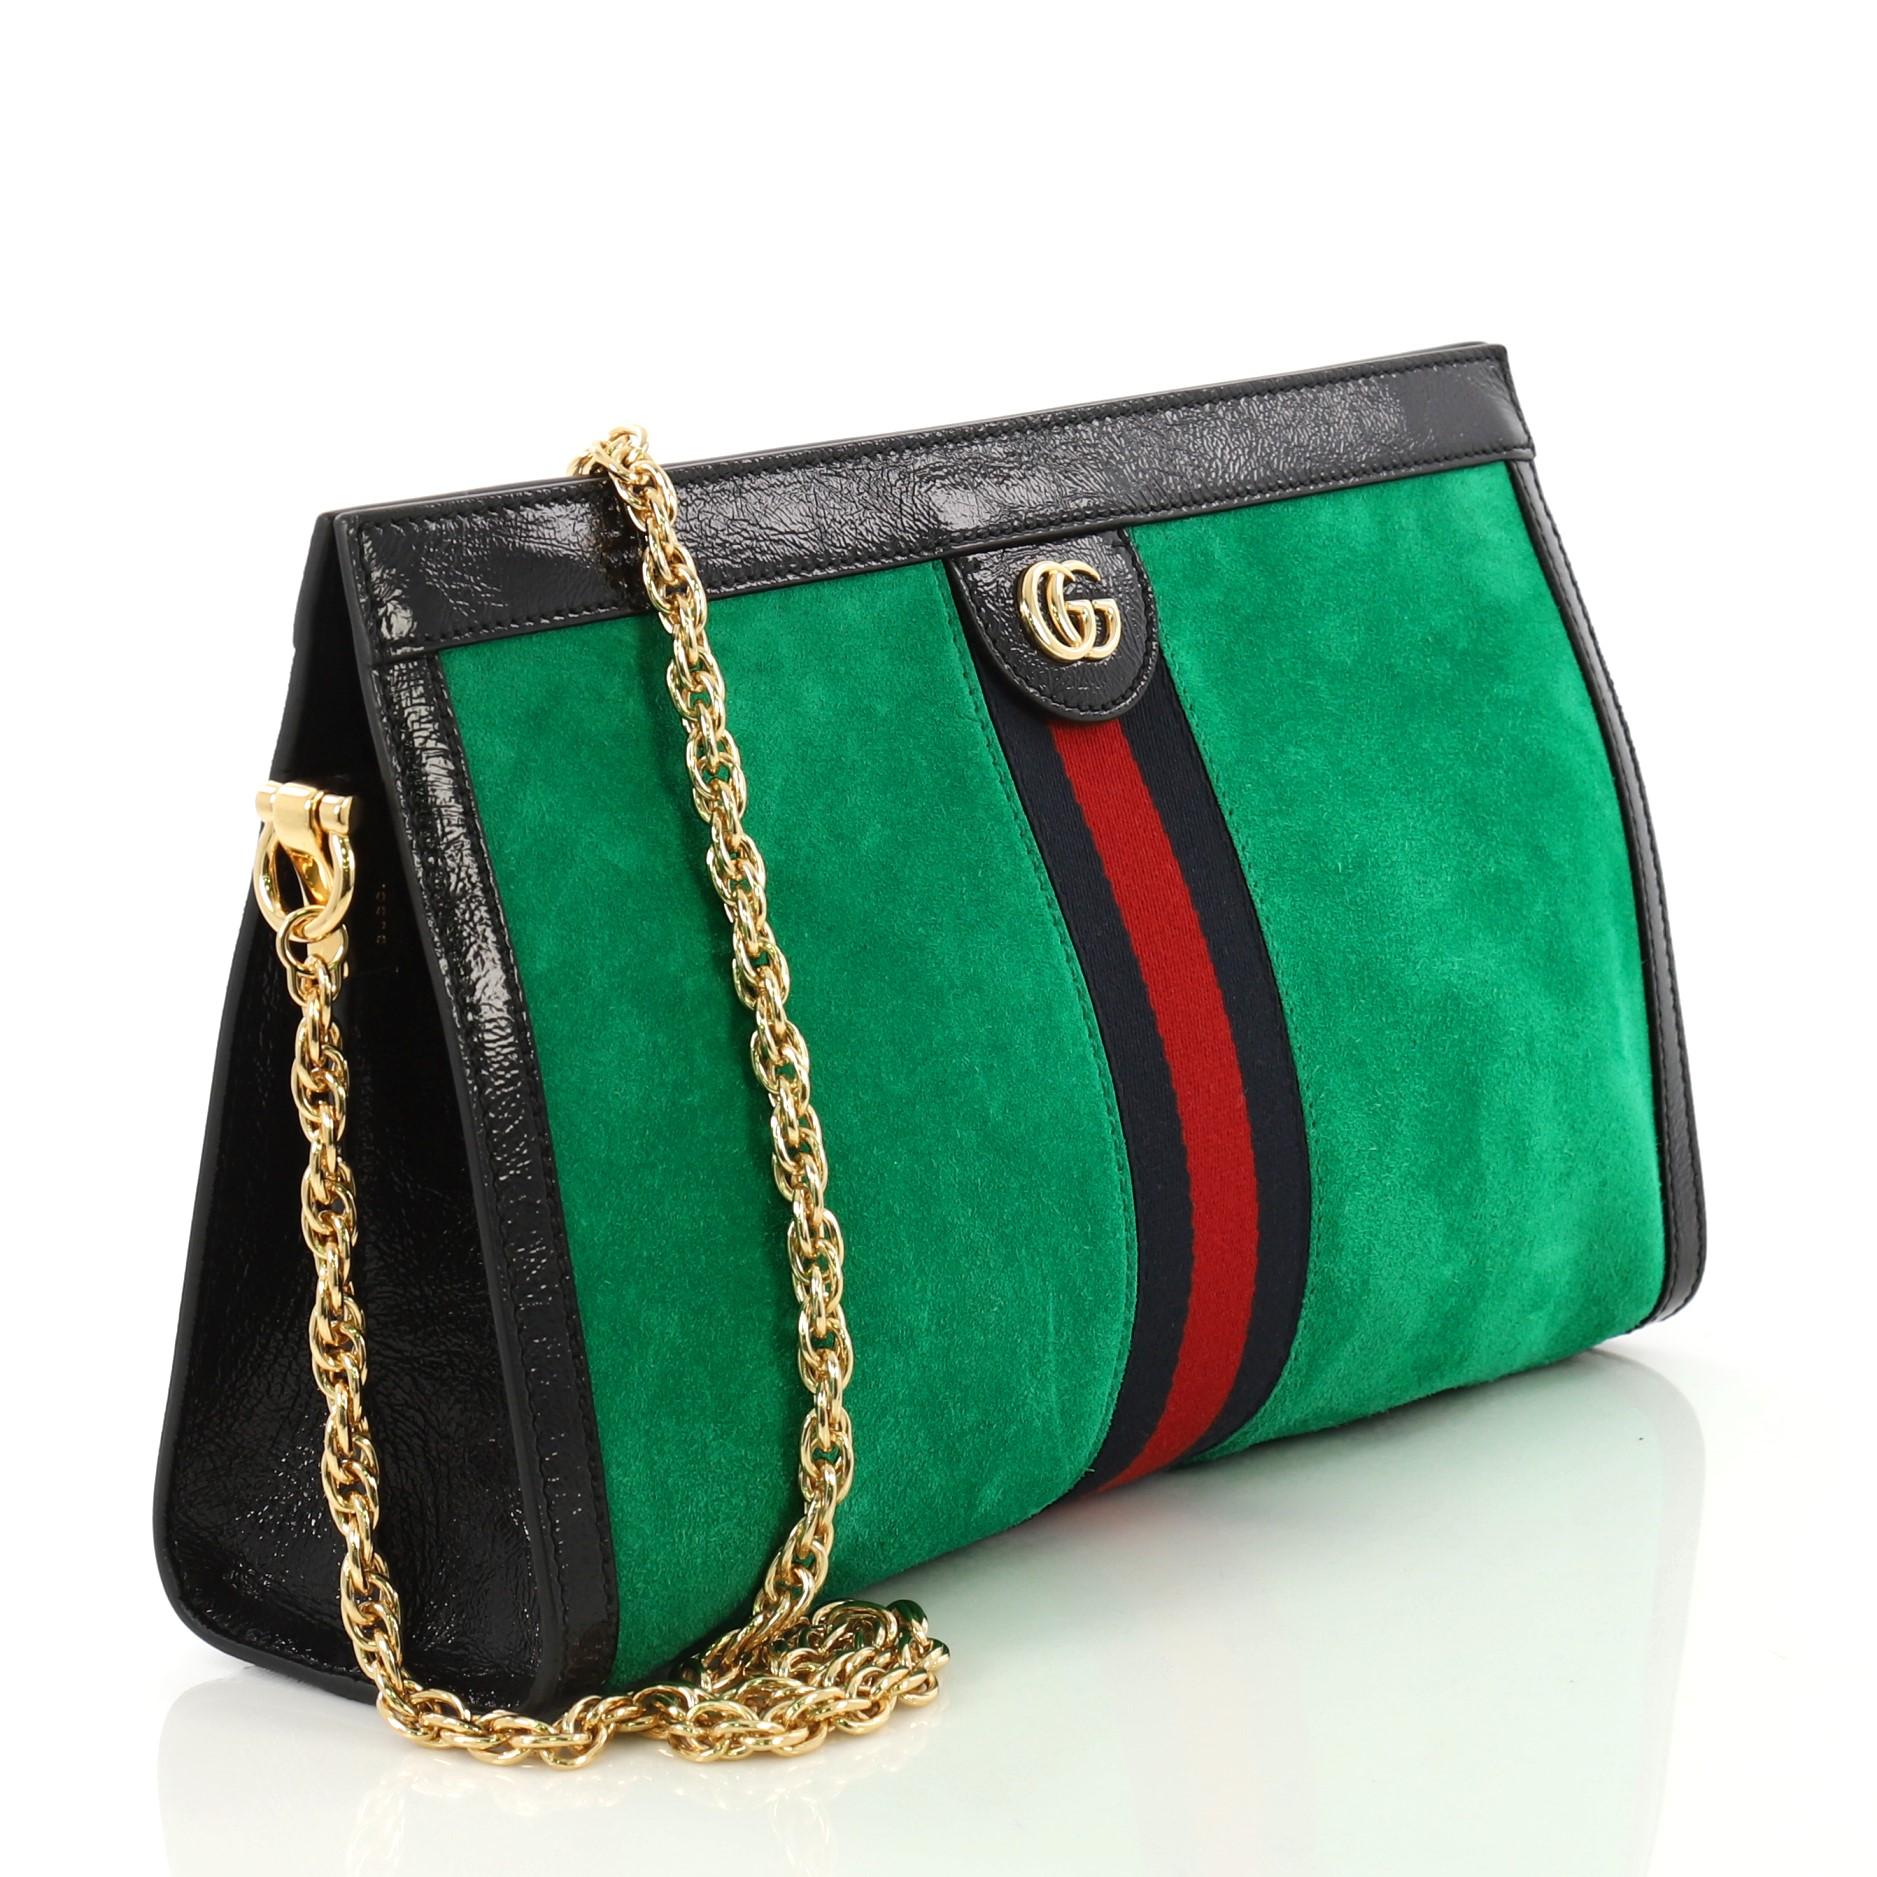 This Gucci Ophidia Chain Shoulder Bag Suede Medium, crafted in green suede, features chain link shoulder strap, web stripe detail, leather trim, Gucci logo, and gold-tone hardware. Its magnetic snap closure opens to a blue satin interior divided